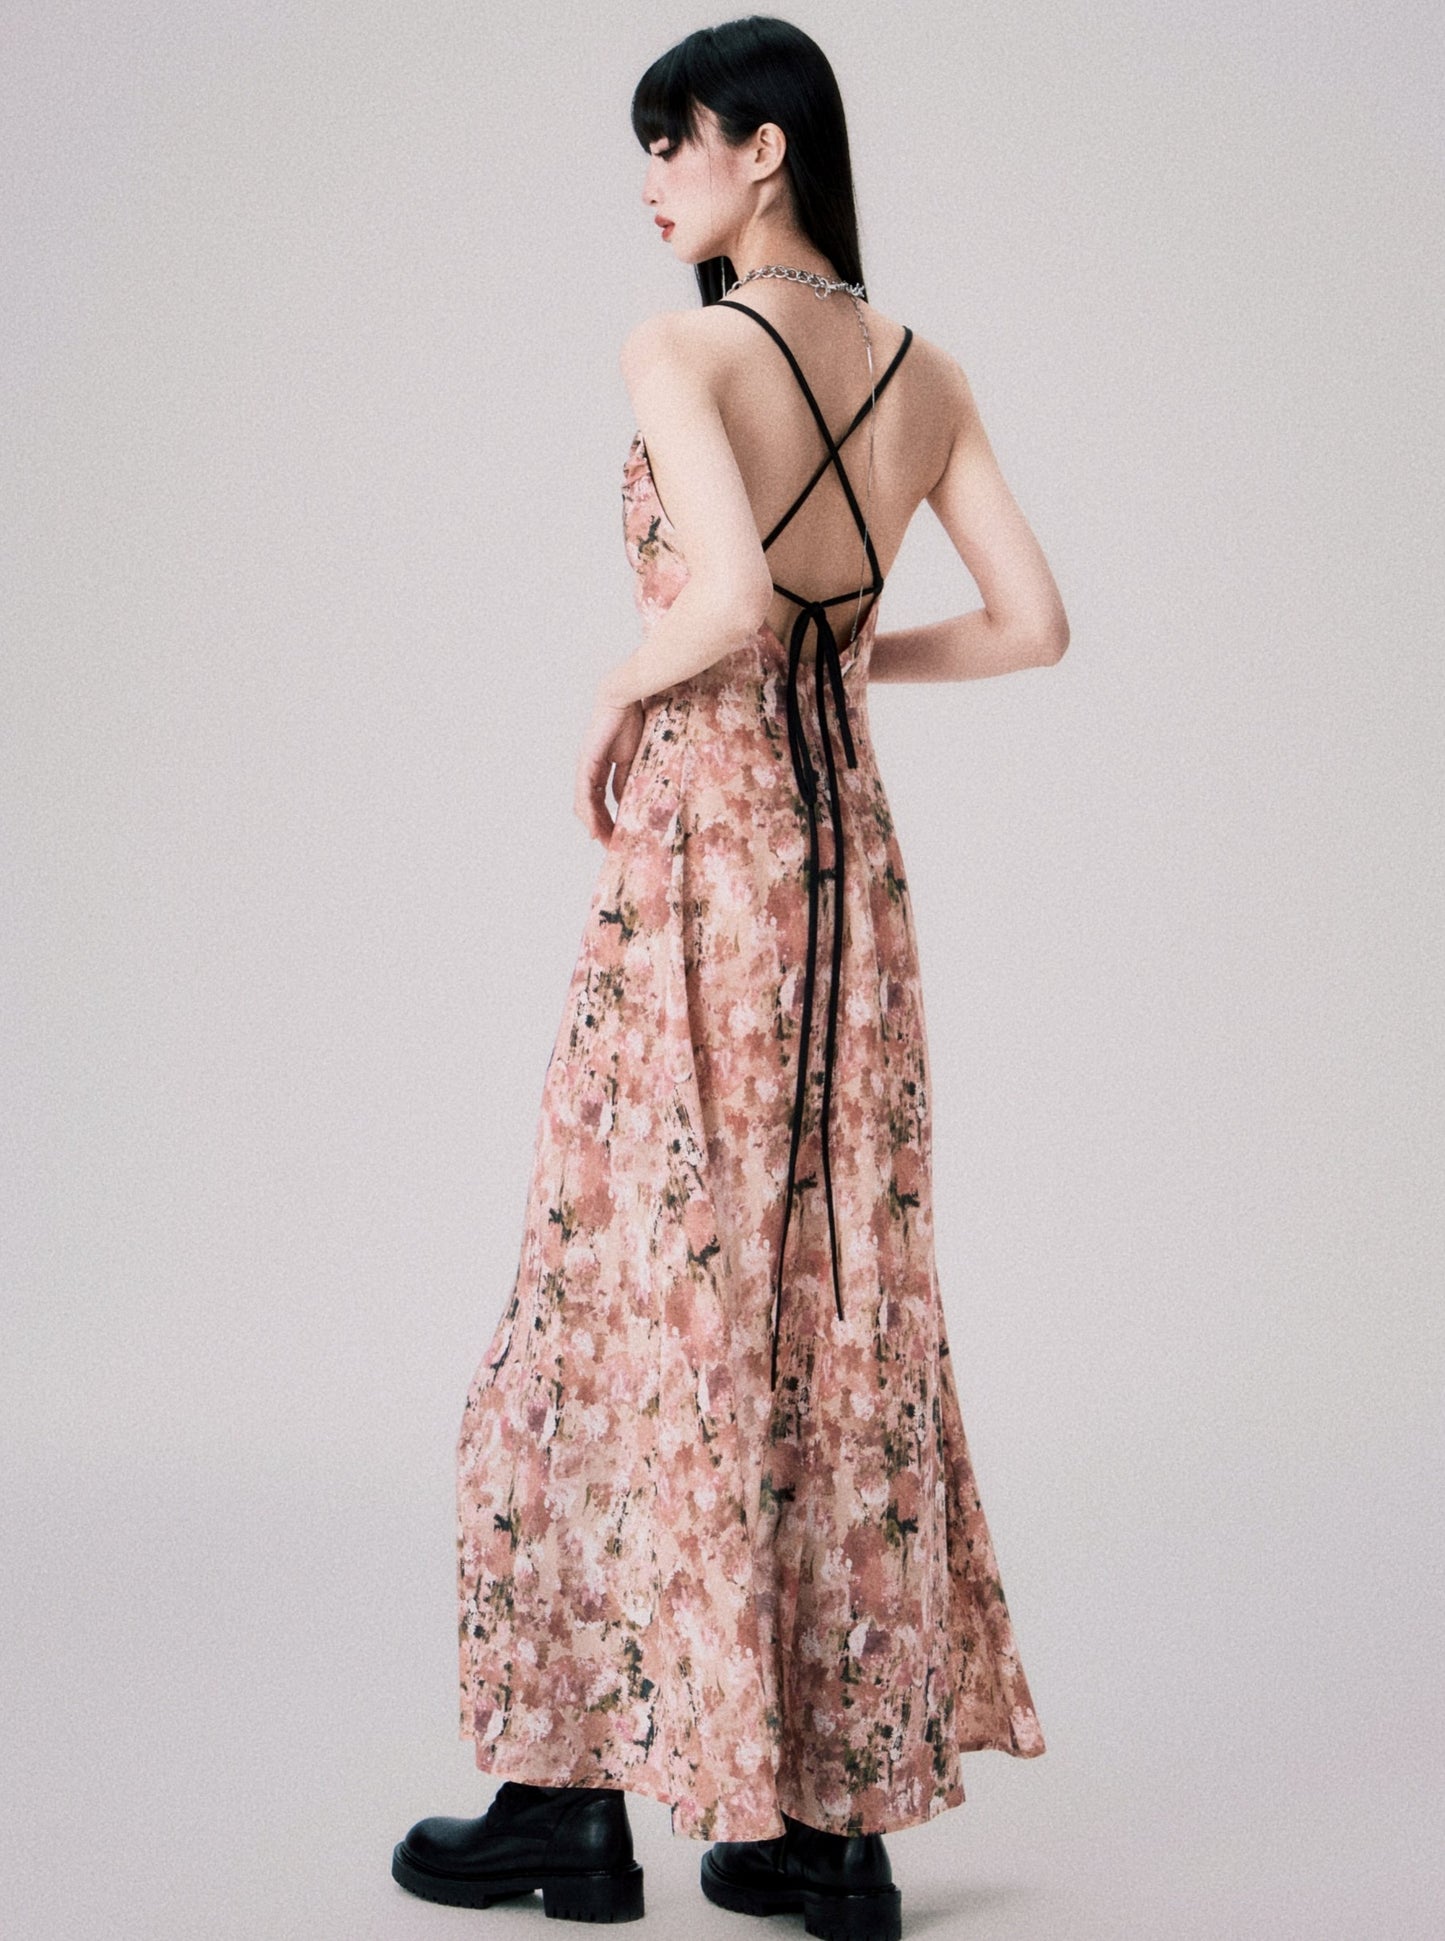 Apricot Pink Floral Swing Dress